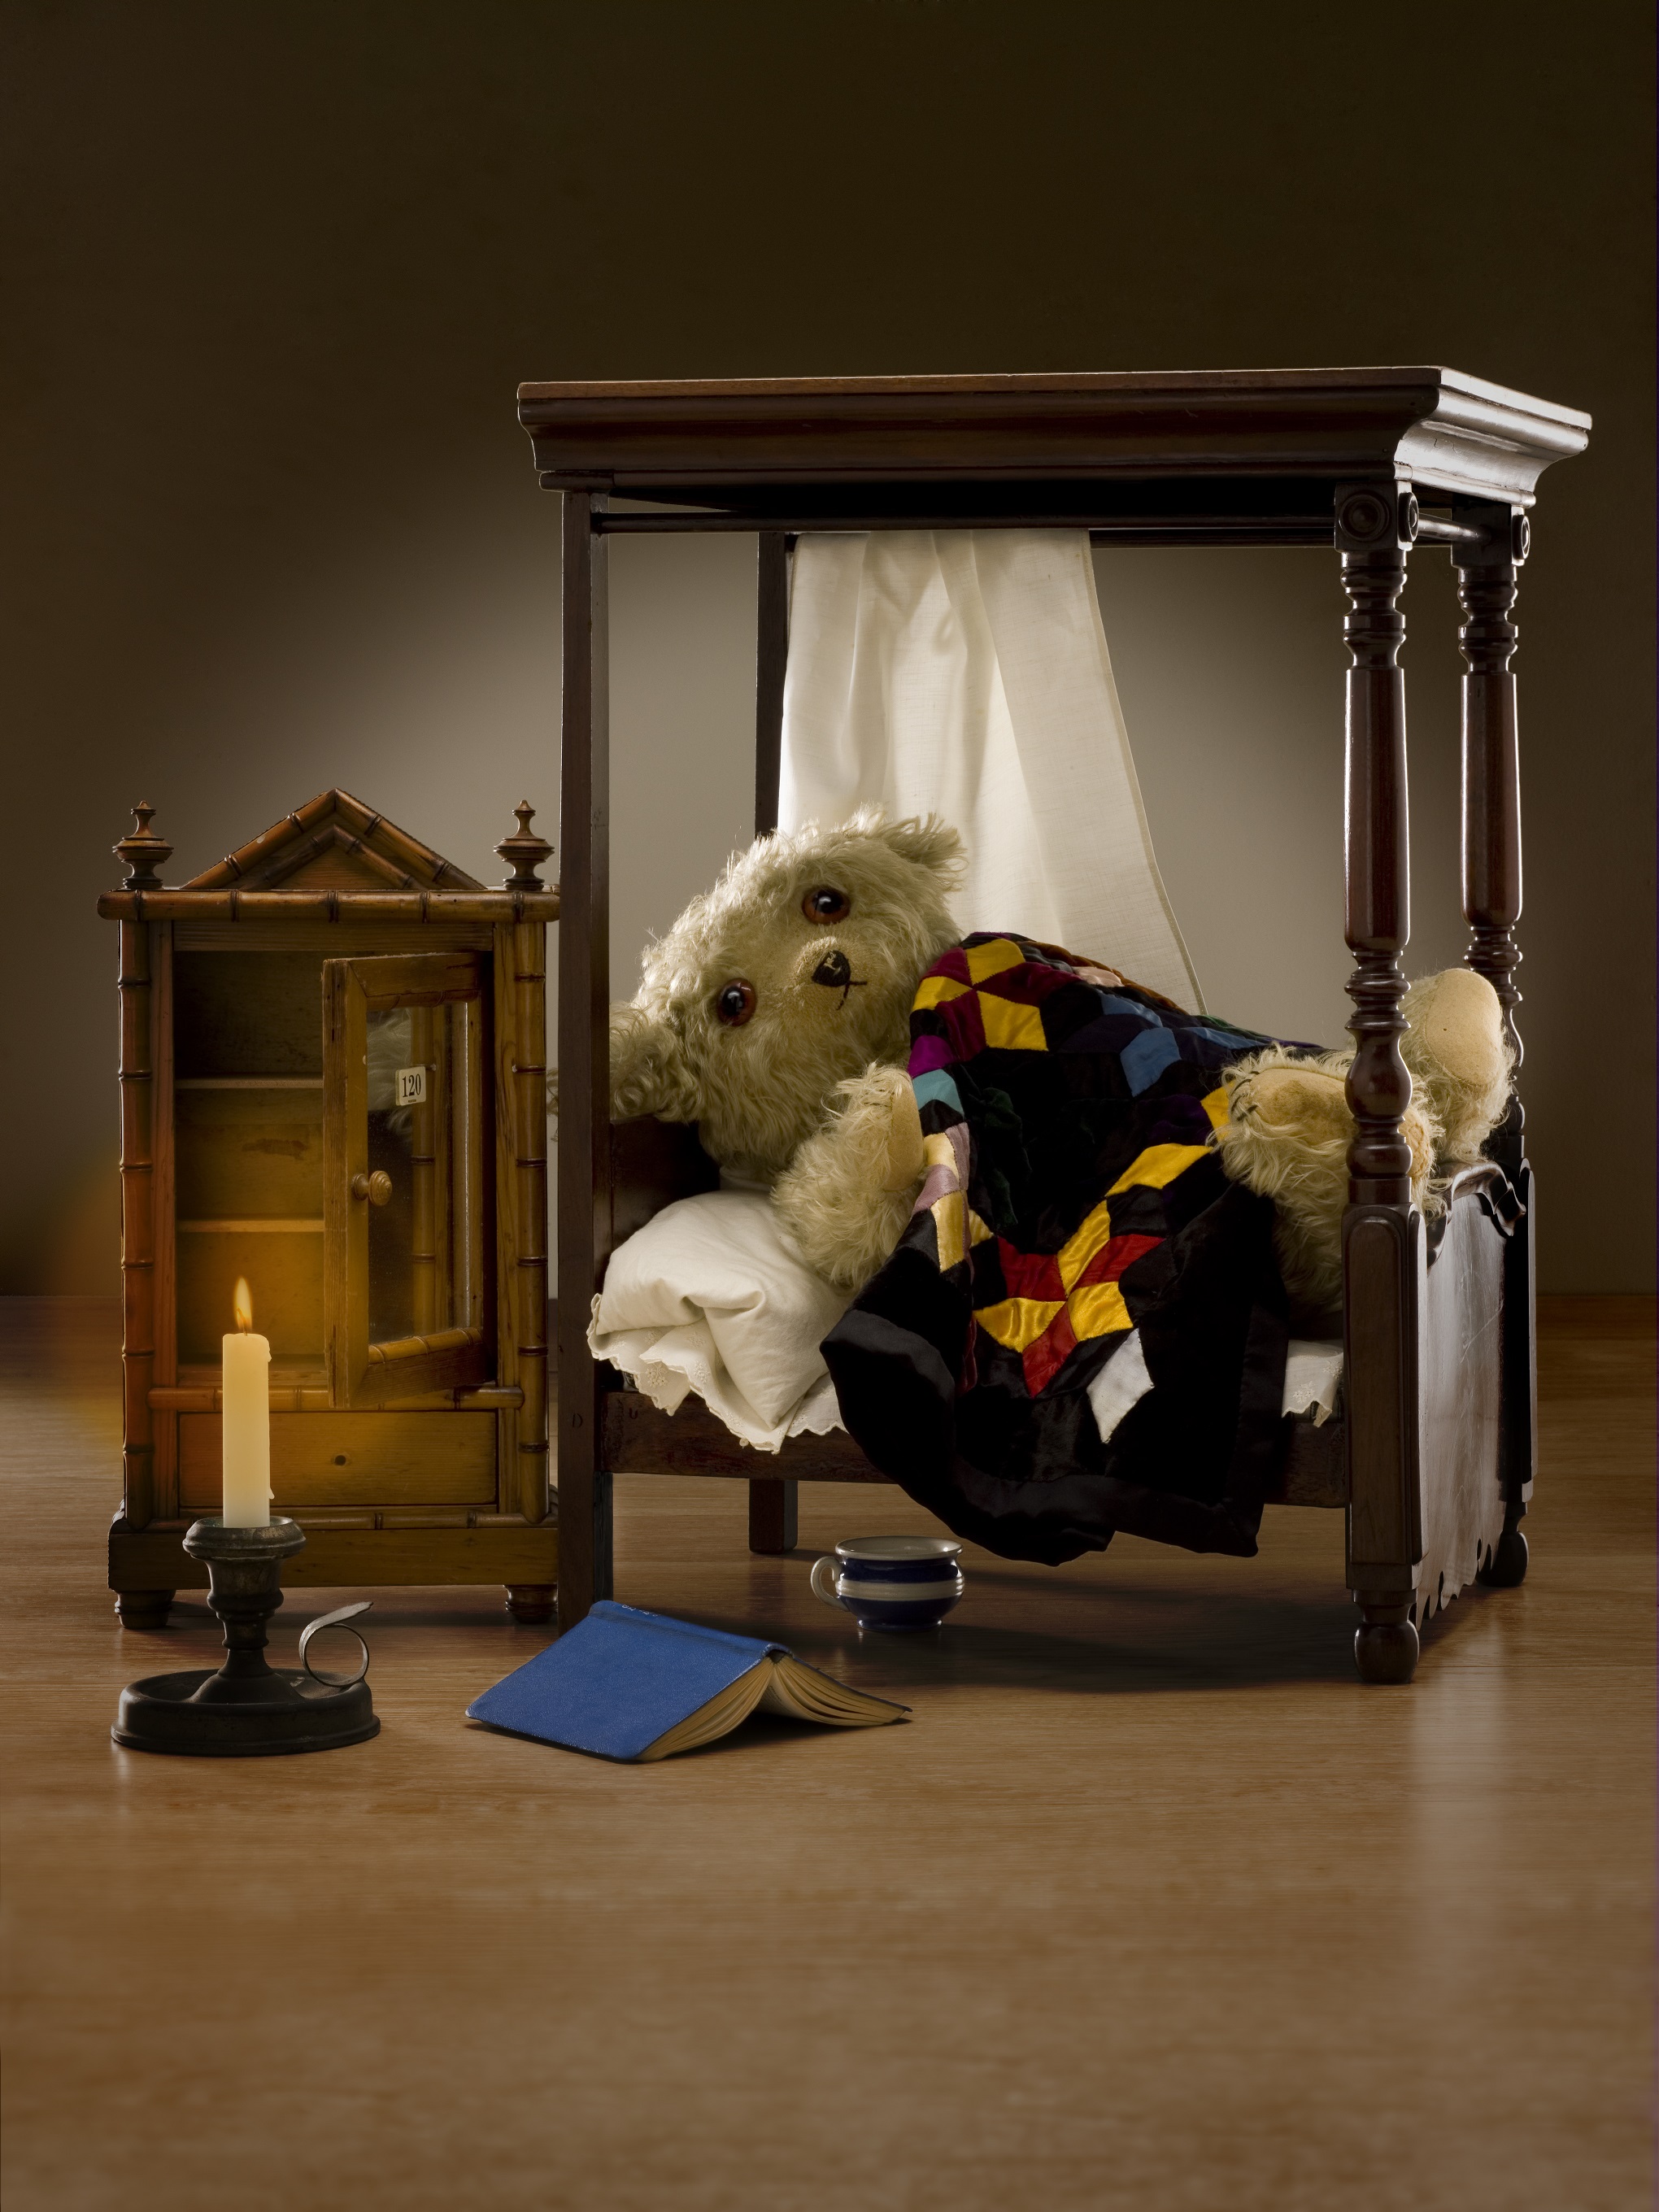 A bedroom scene with a doll's four-poster bed with a teddy bear